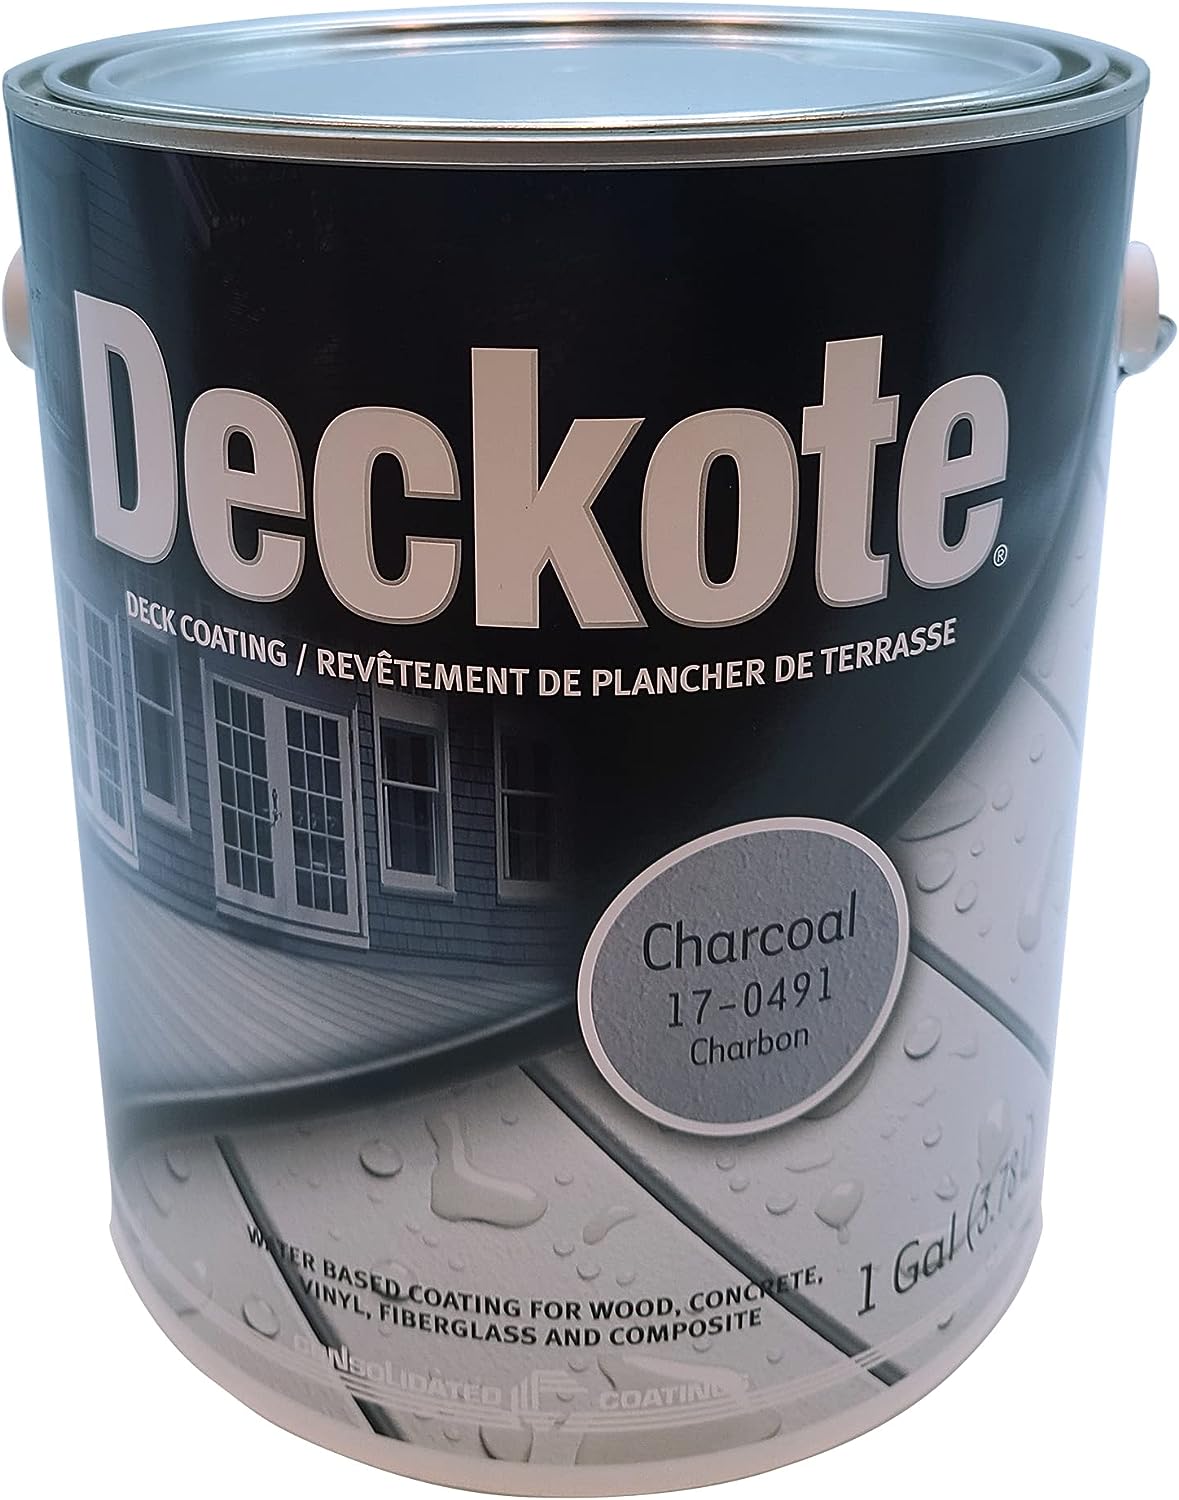 Deckote Charcoal 1 Gallon Deck Coating – UV Protection [...]